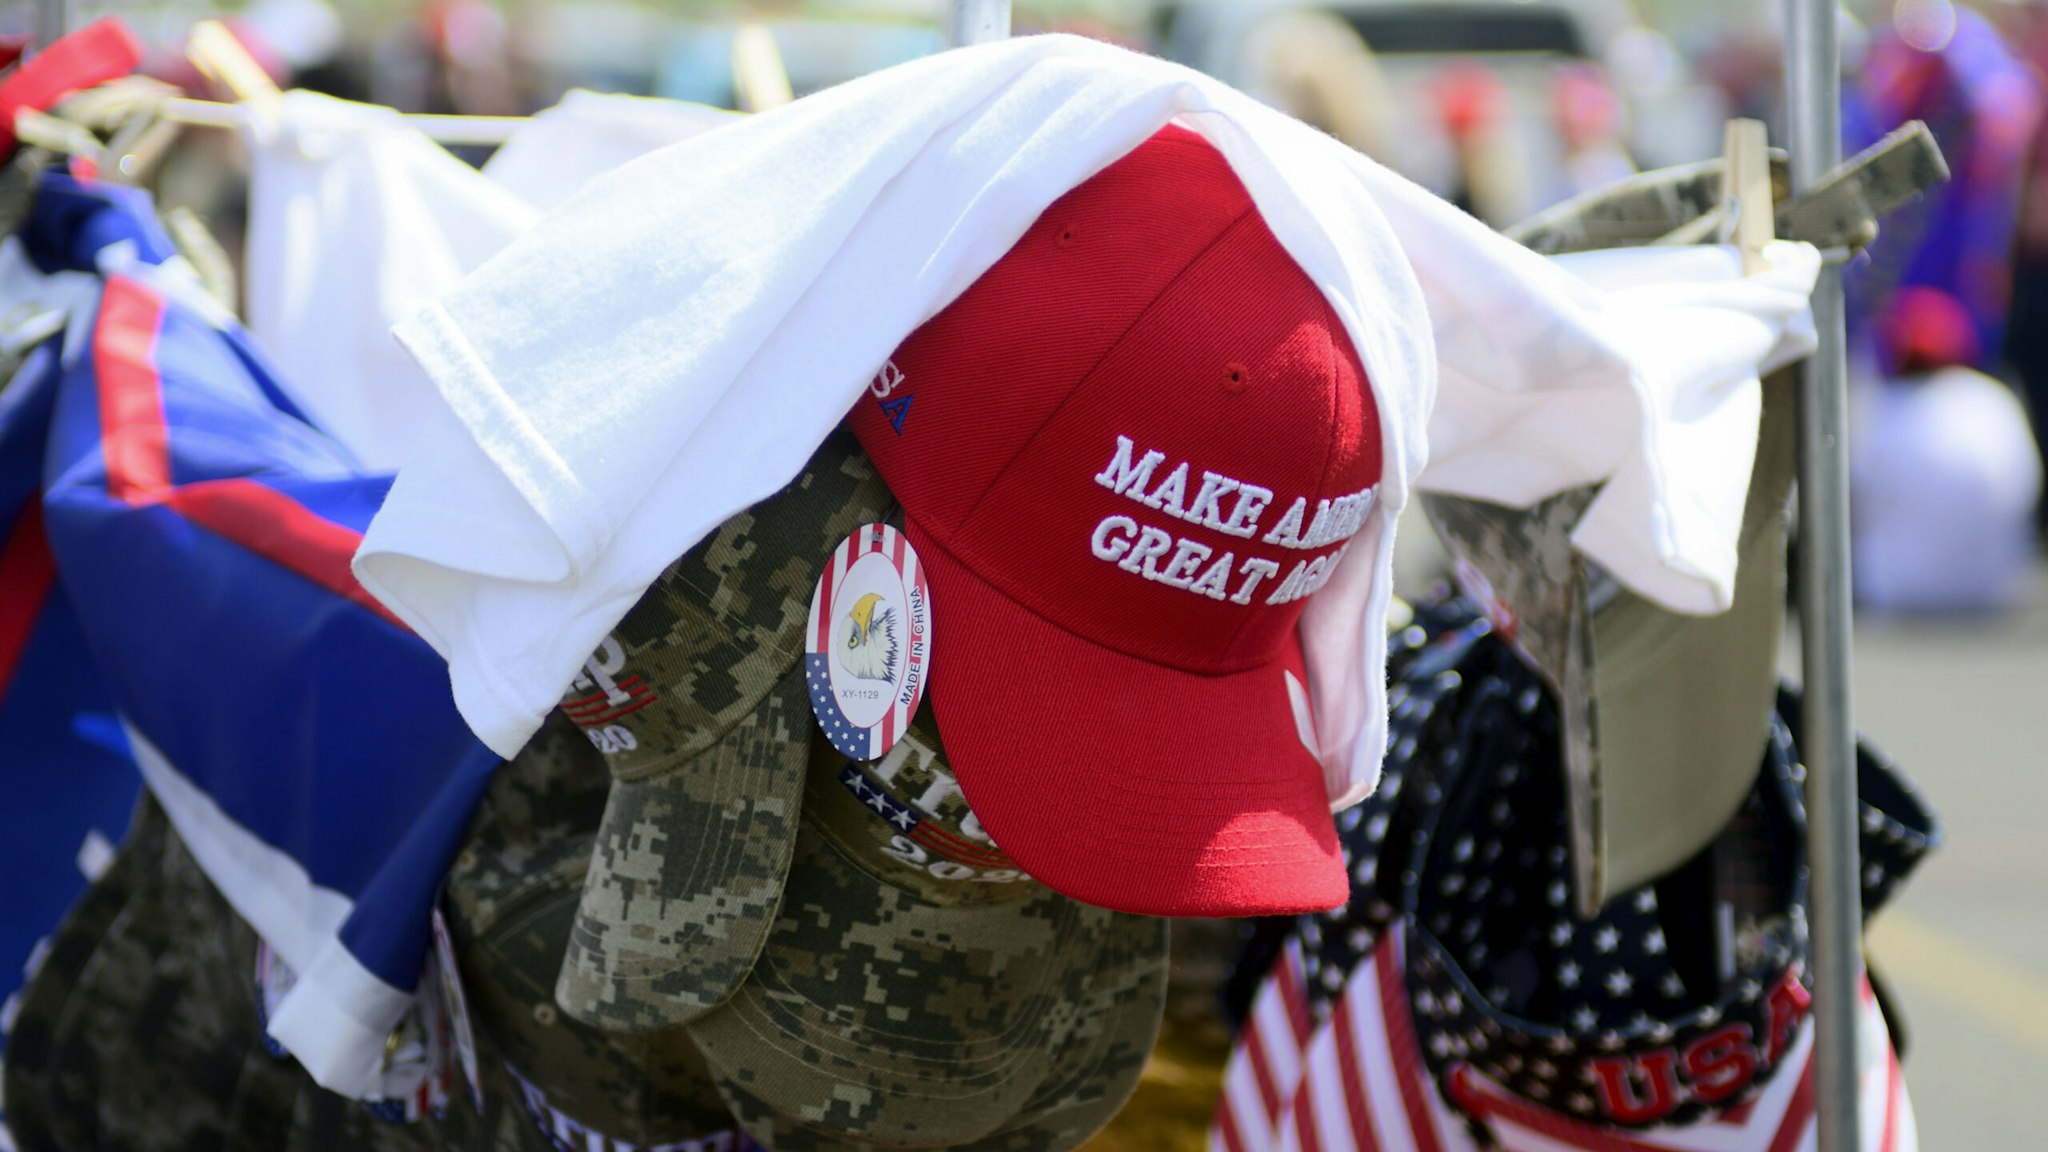 A red Make America Great Again hat sits atop of a rack with camouflage and patriotic hats as supporters wait in line hours ahead of a Trump campaign rally at the Williamsport Regional Airport, in Montoursville, PA on May 20, 2019. (Photo by Bastiaan Slabbers/NurPhoto via Getty Images)